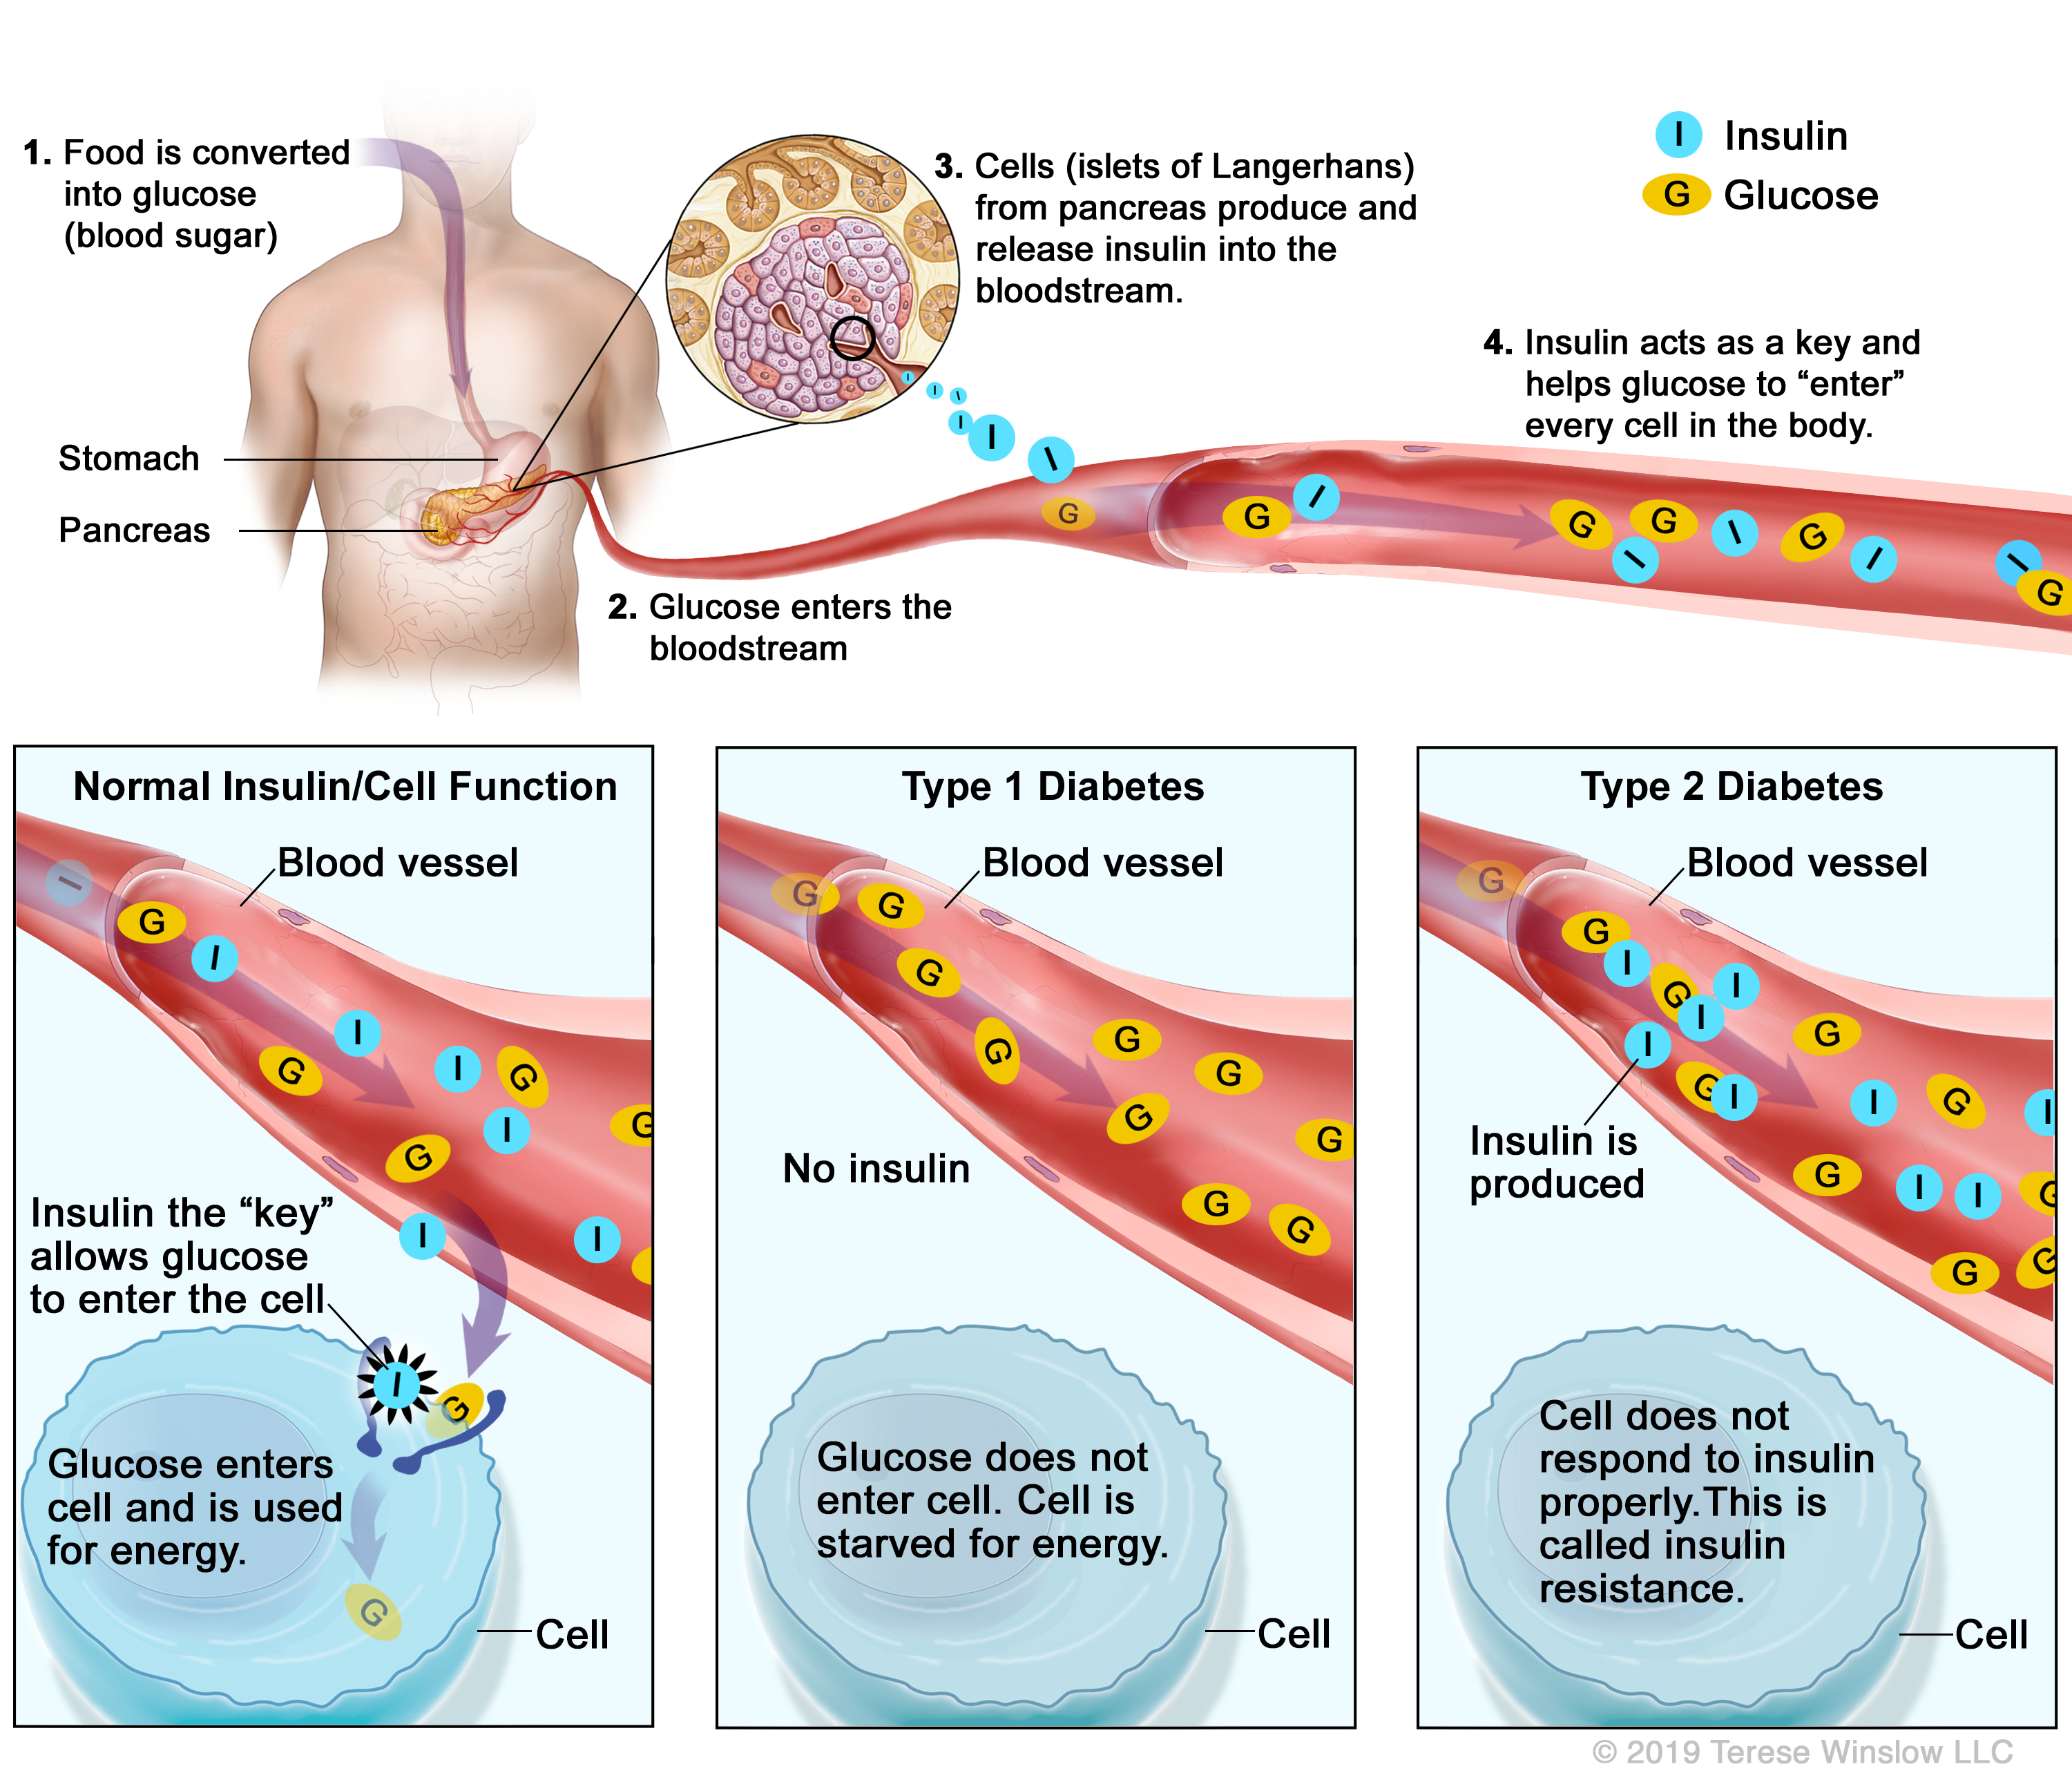 Visual medical illustration describing type 1 diabetes and type 2 diabetes versus normal cell function